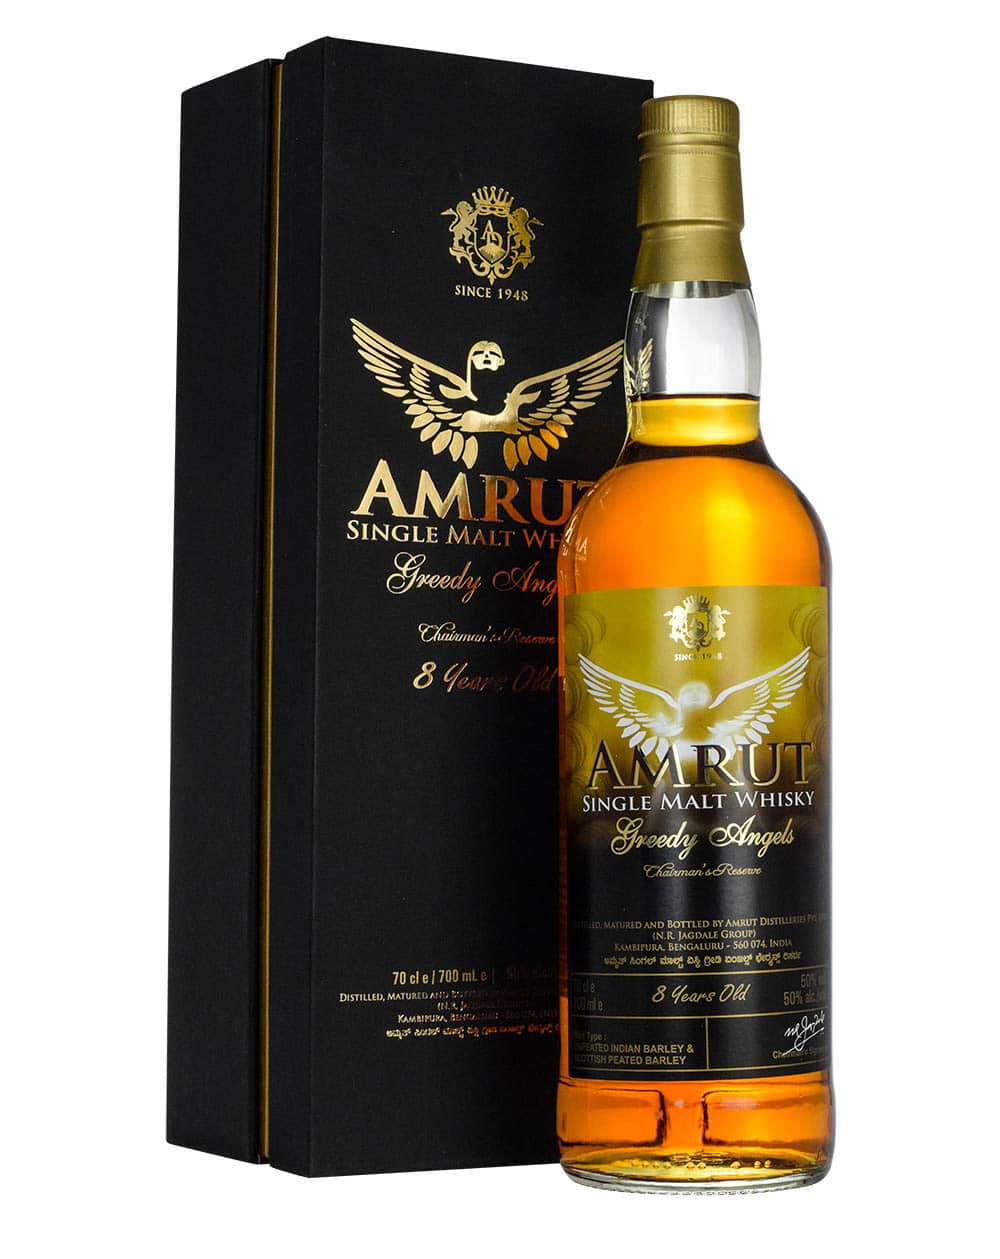 Amrut 8 Years Old Greedy Angels Box Must Have Malts MHM